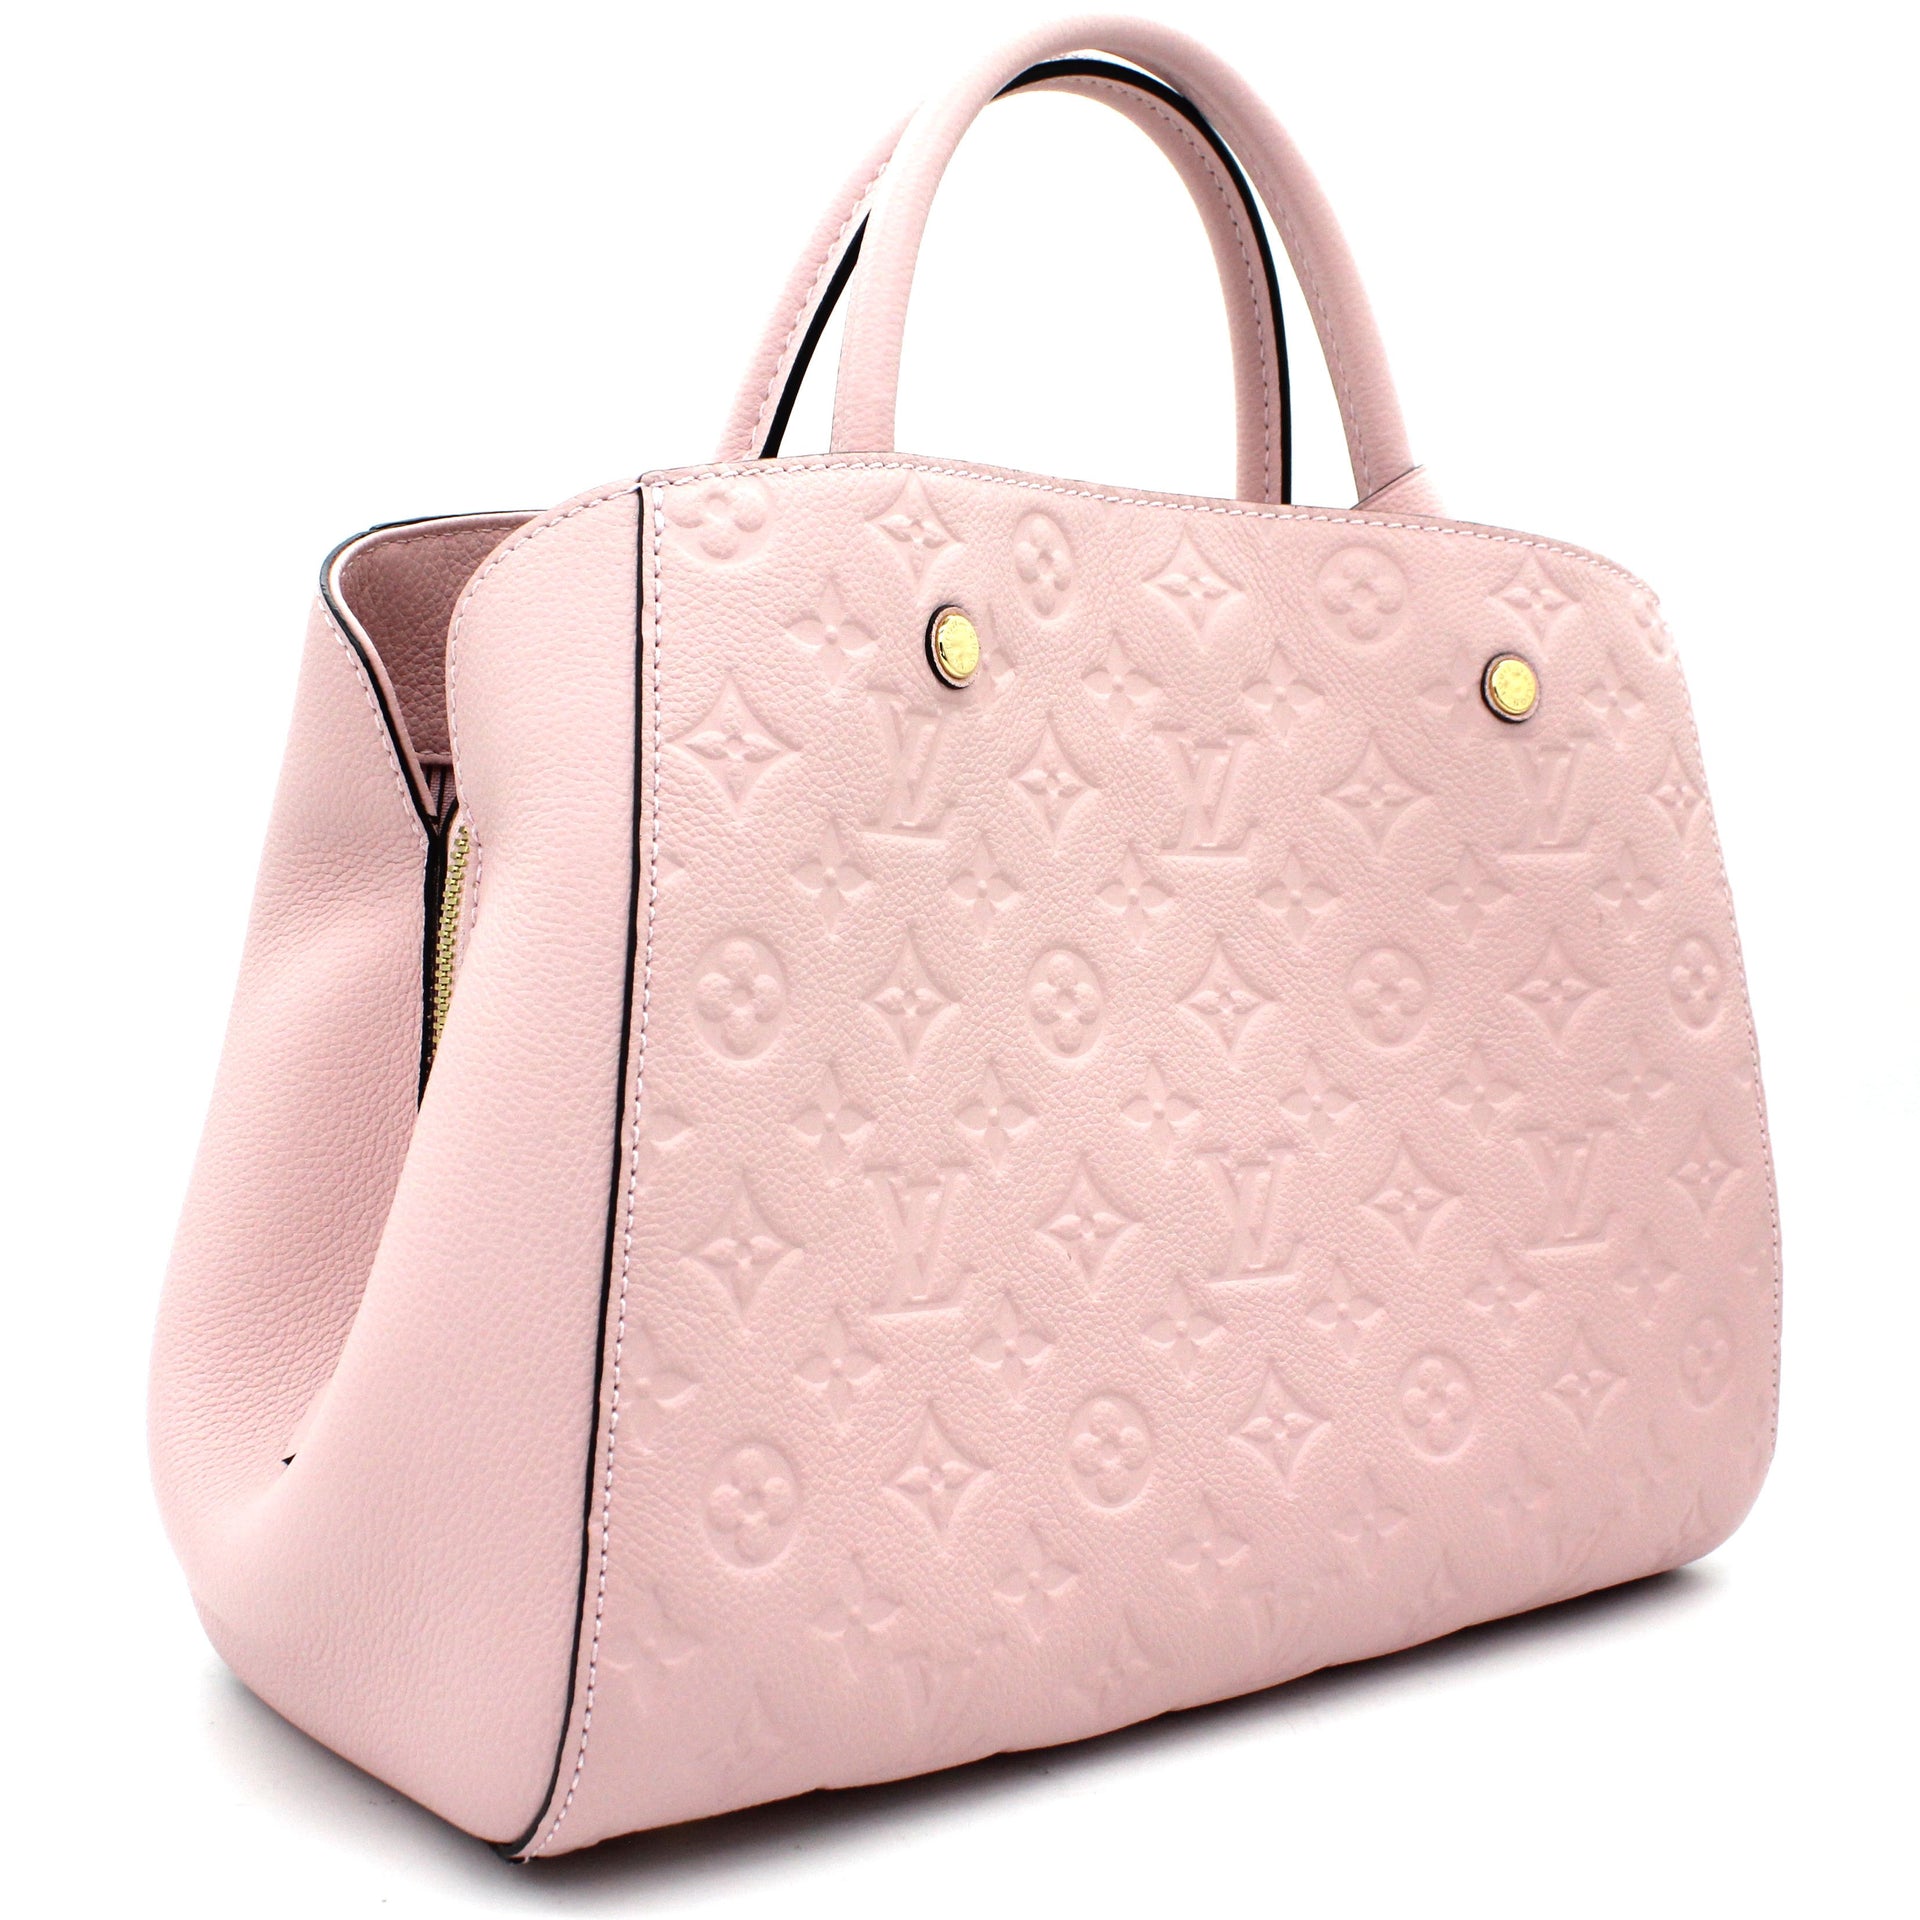 Montaigne leather handbag Louis Vuitton Pink in Leather - 36956271